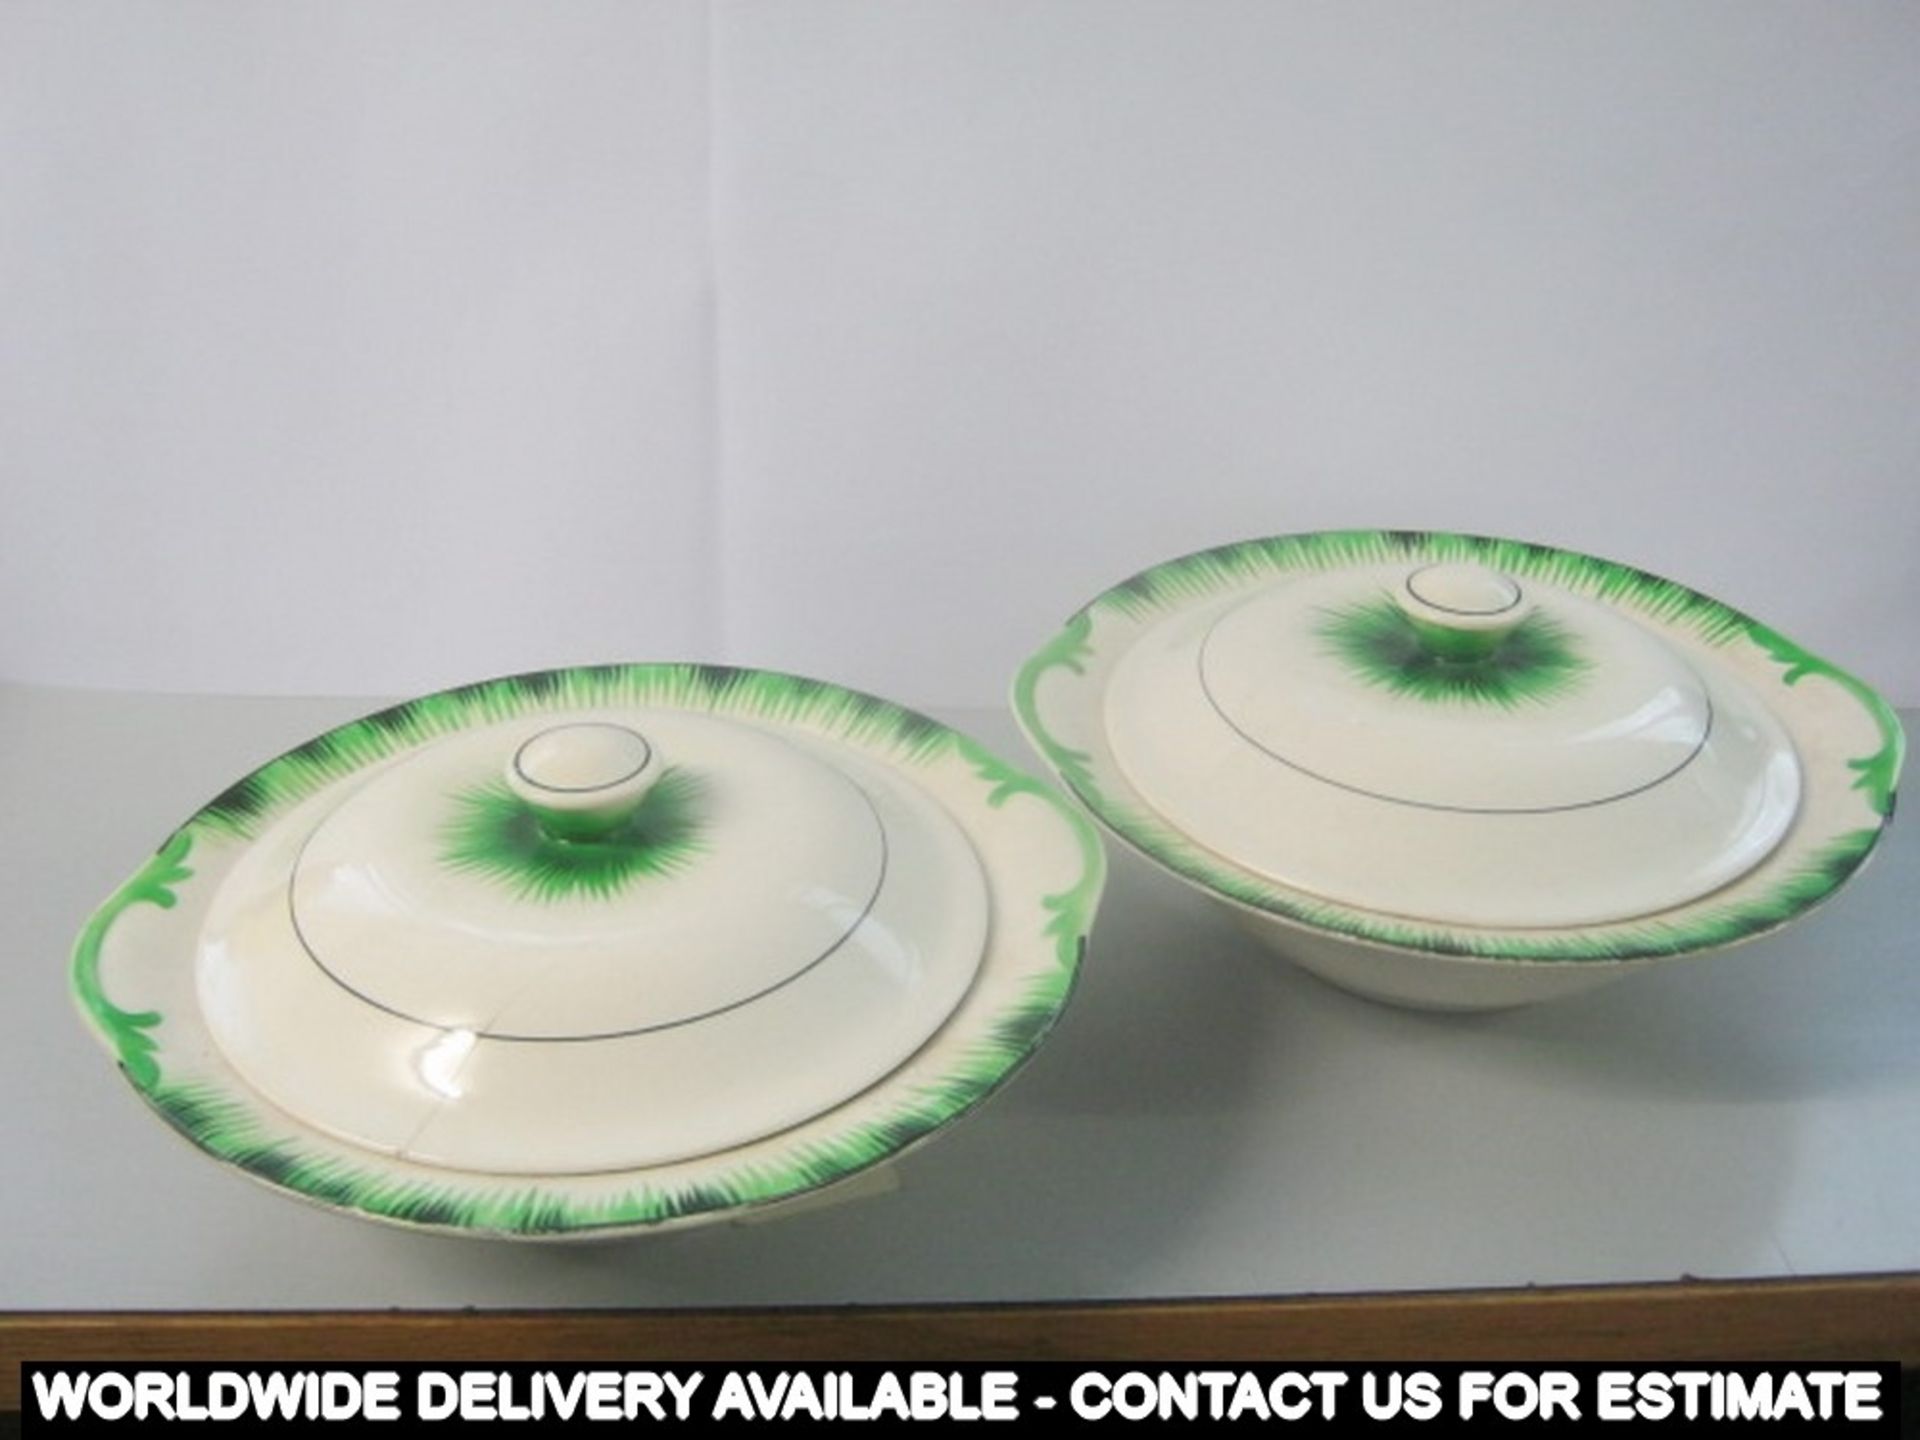 Two lidded serving dishes - "Grasmere"